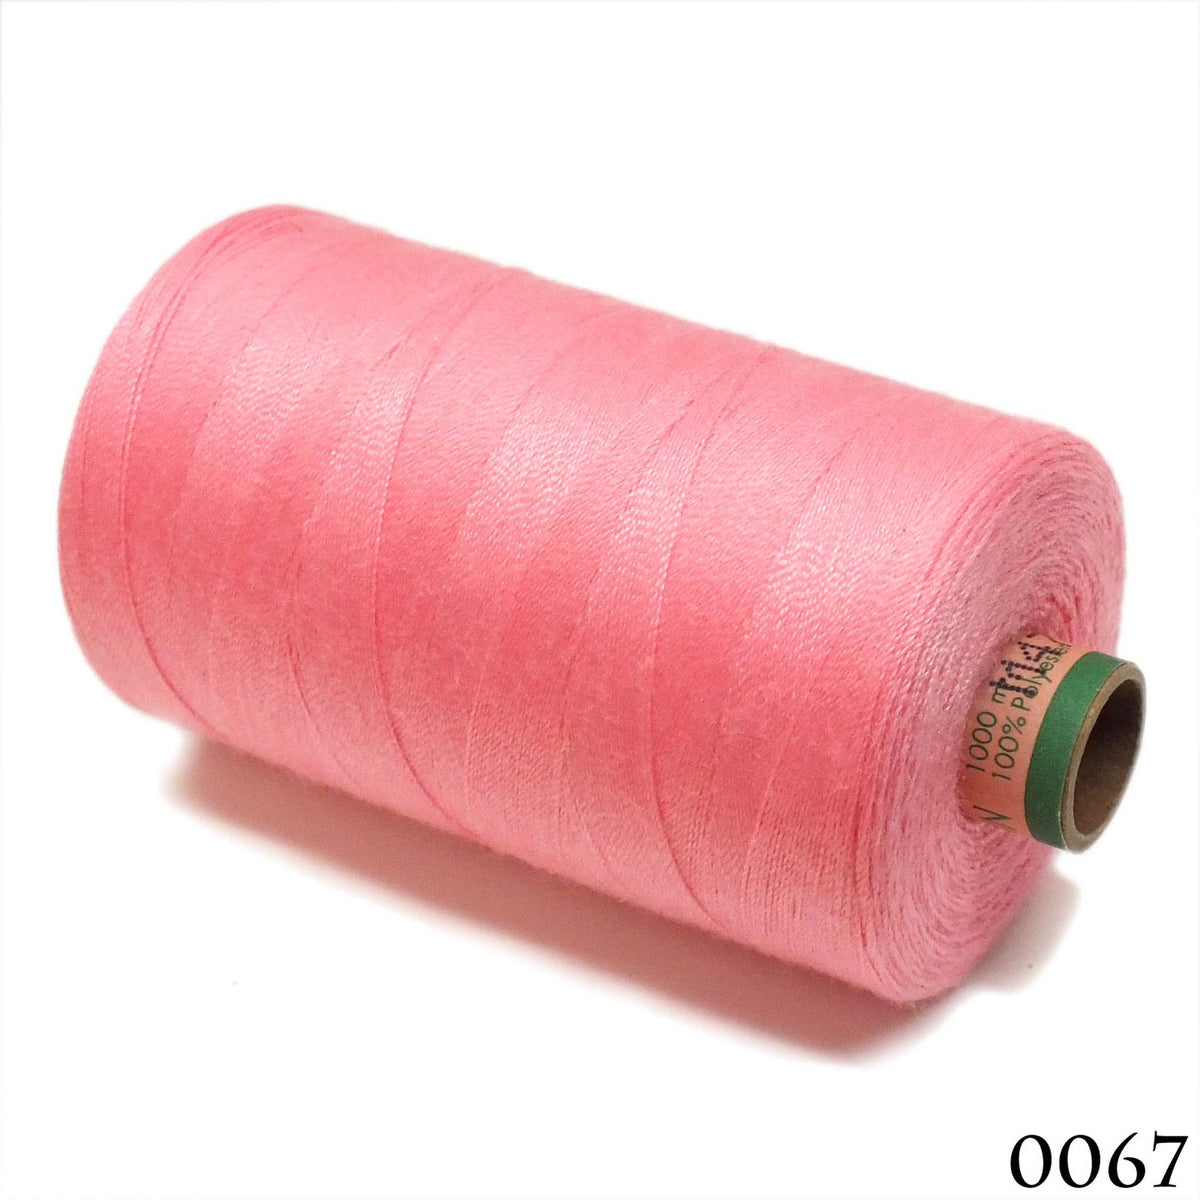 Sewing Thread - White - 1,000m, Sewing & Textiles